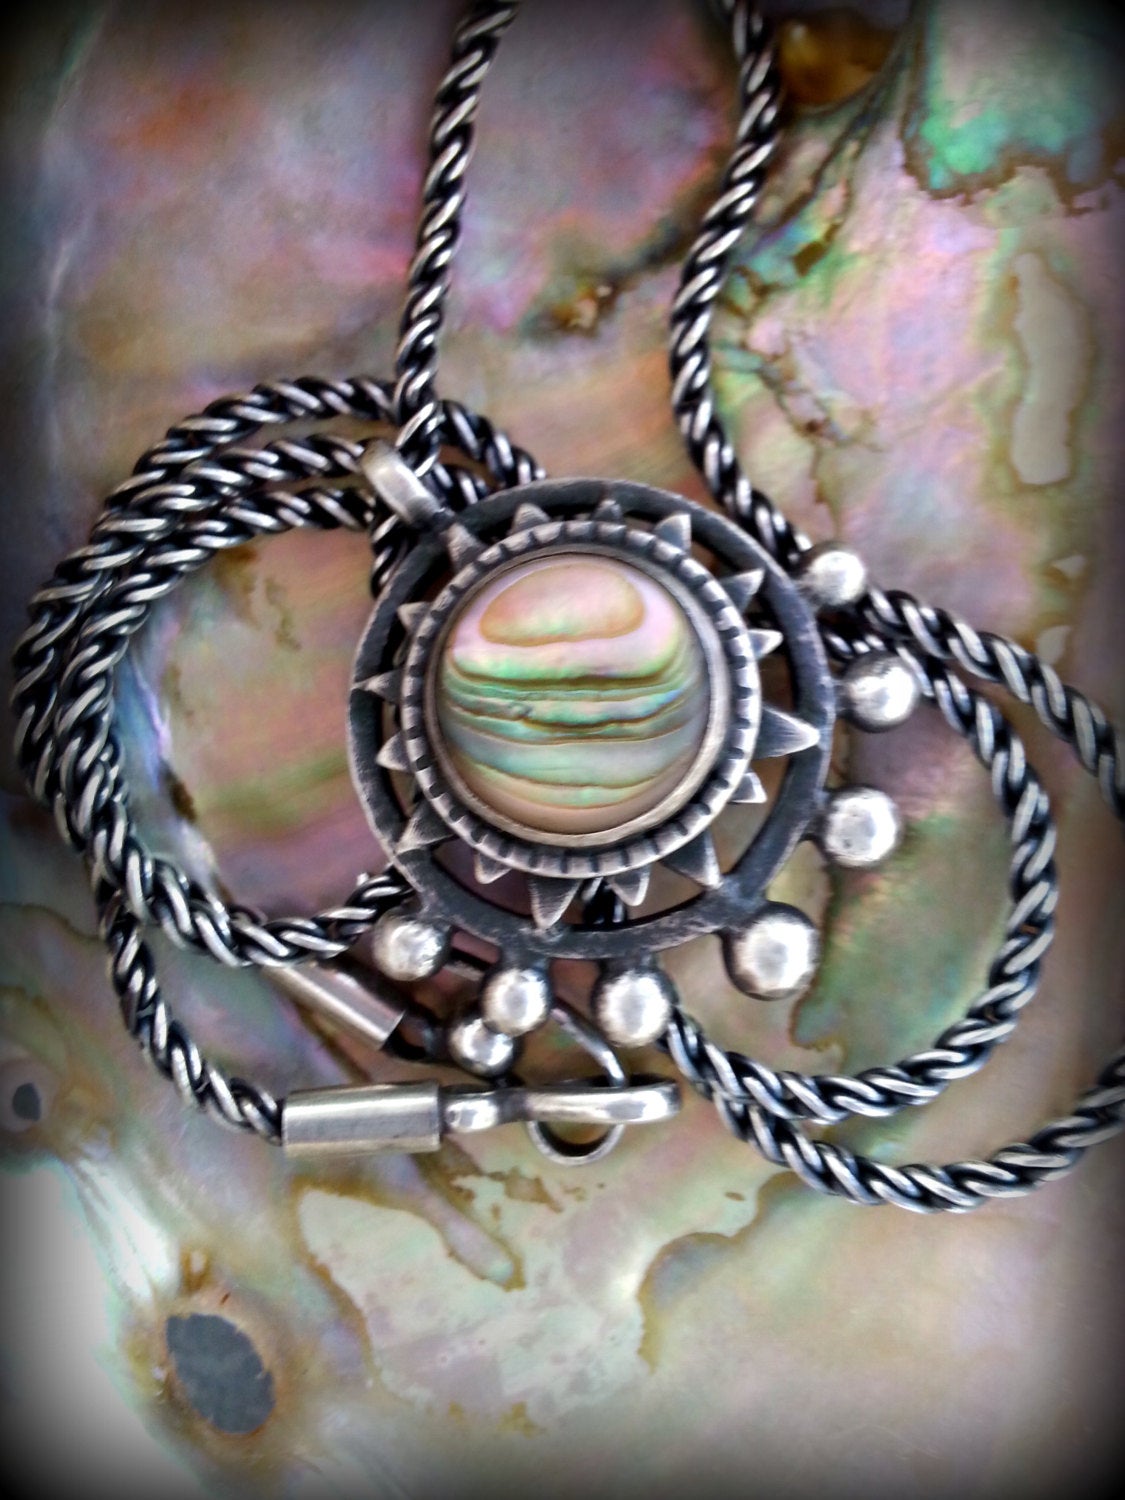 Seven Planets Celestial Amulet Necklace set with Abalone